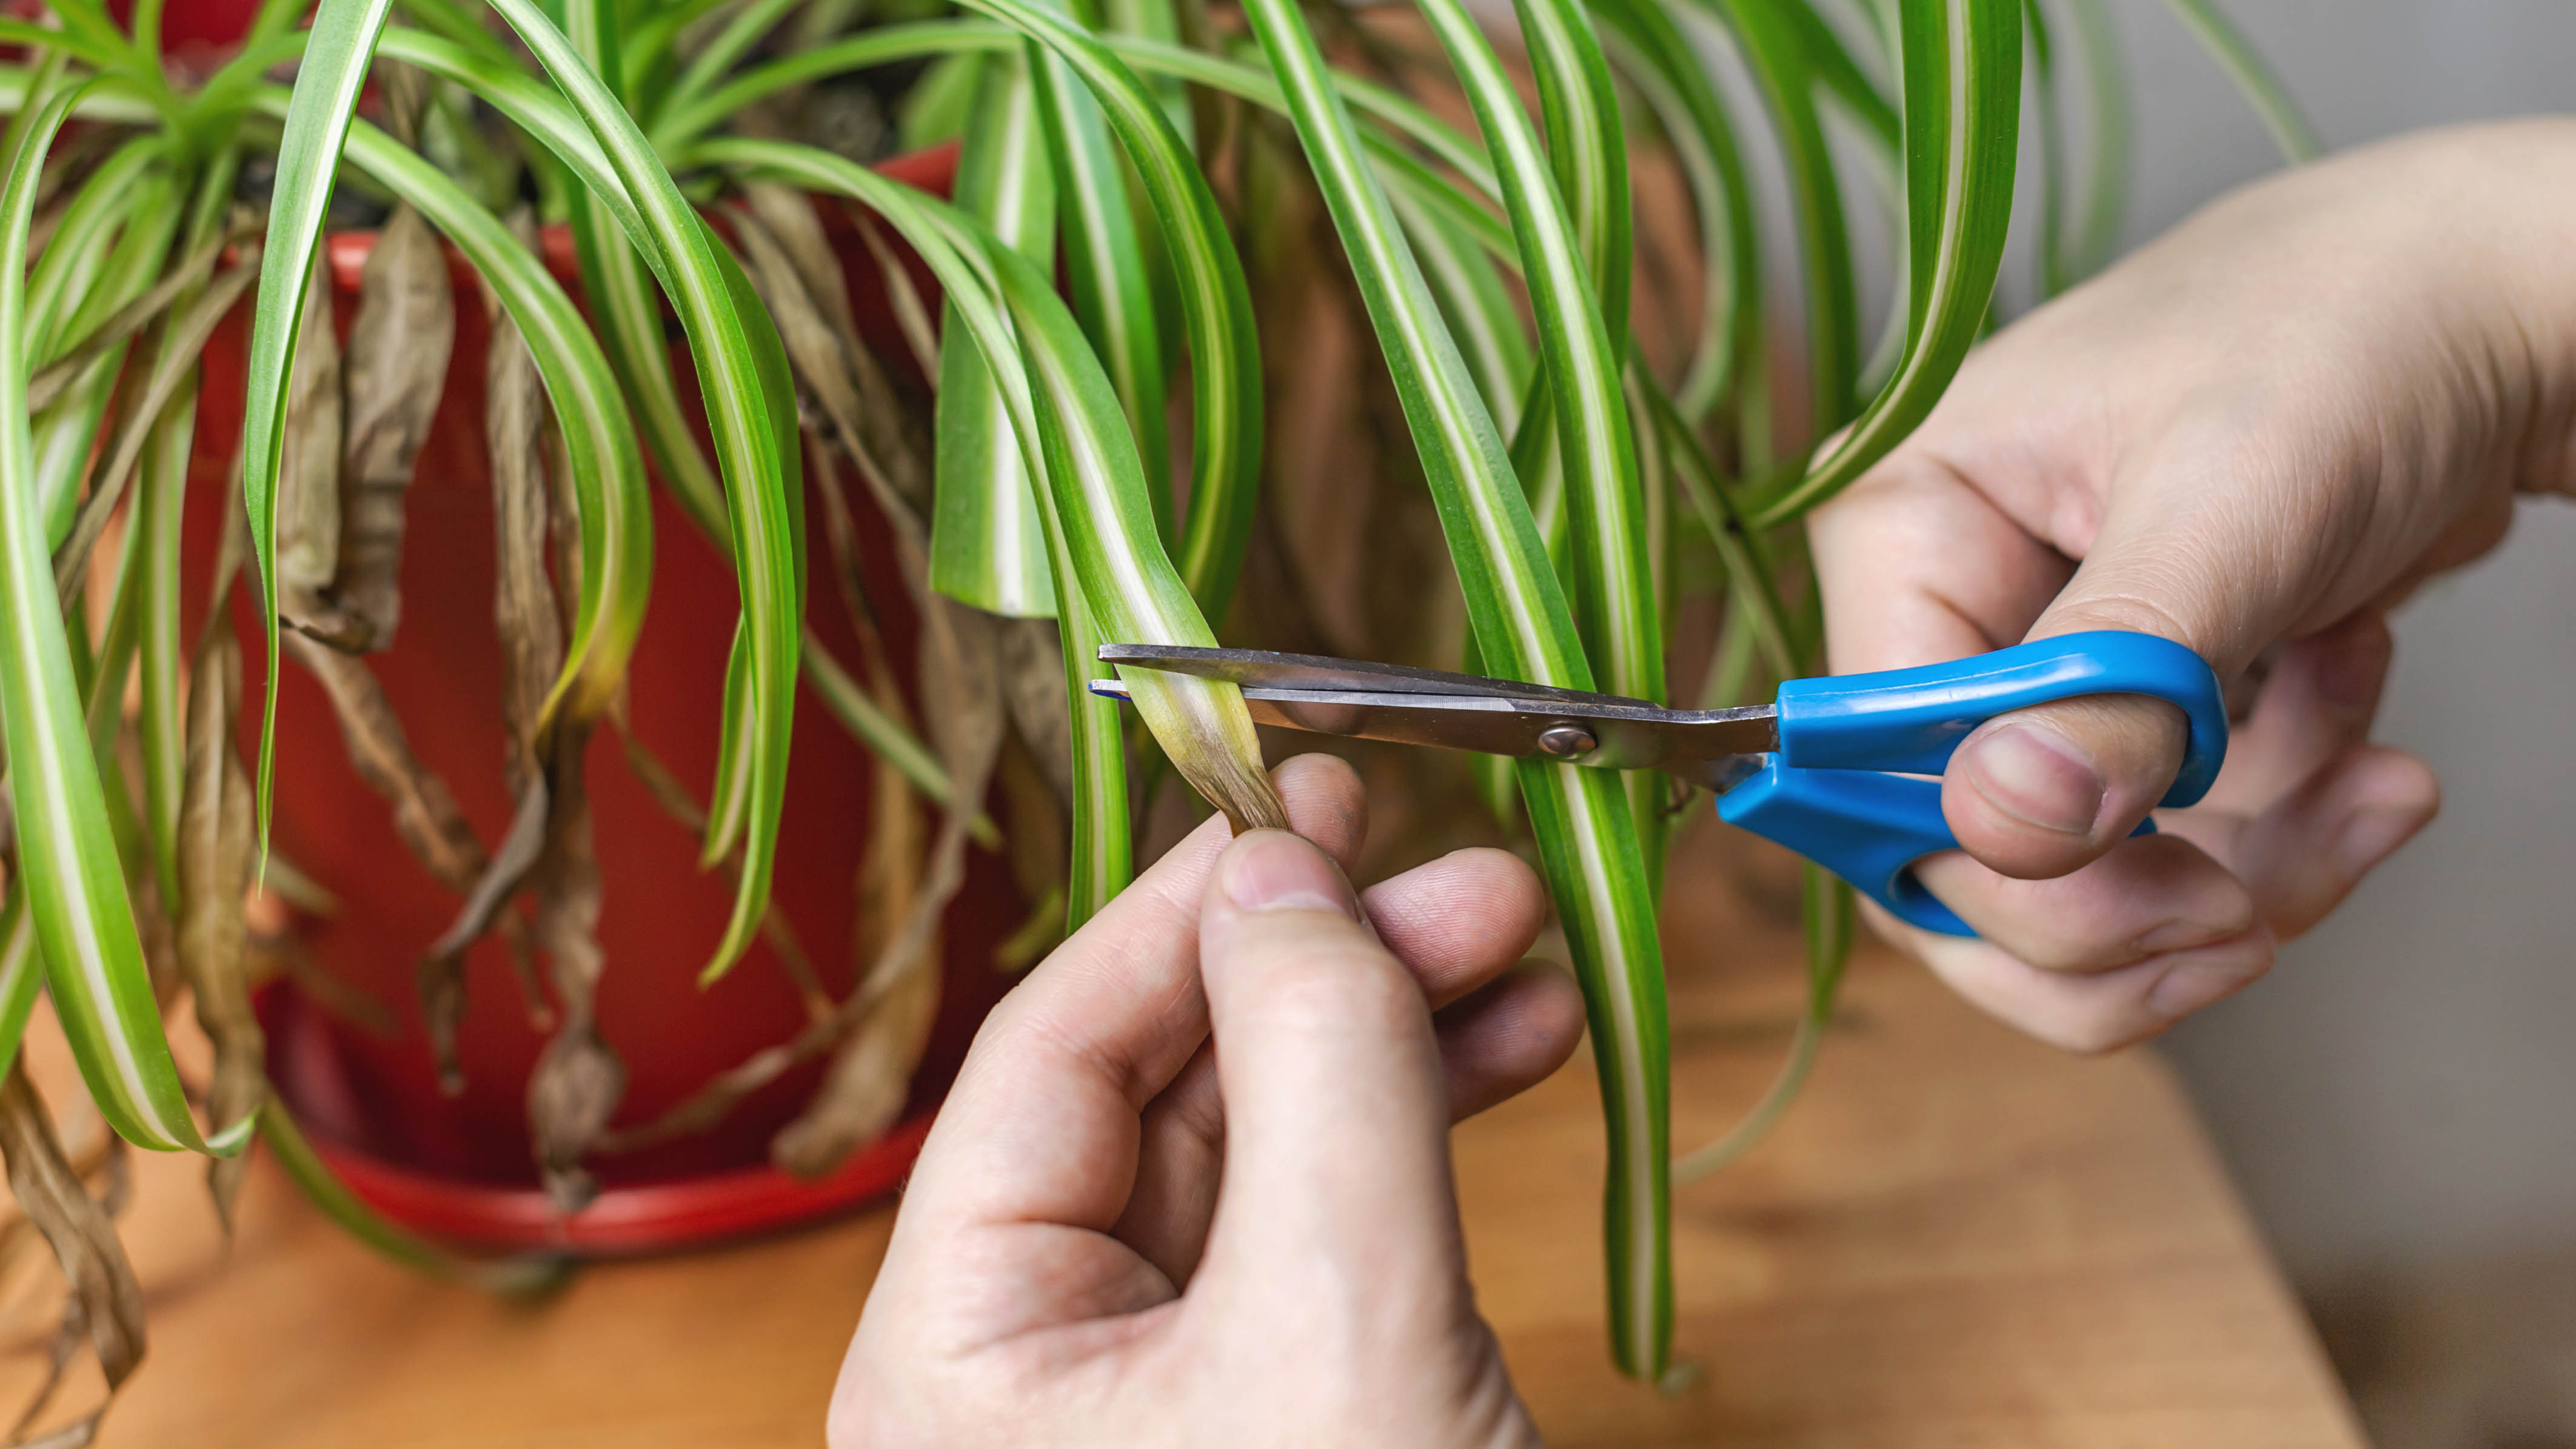 Brown leaves are cut from spider plant